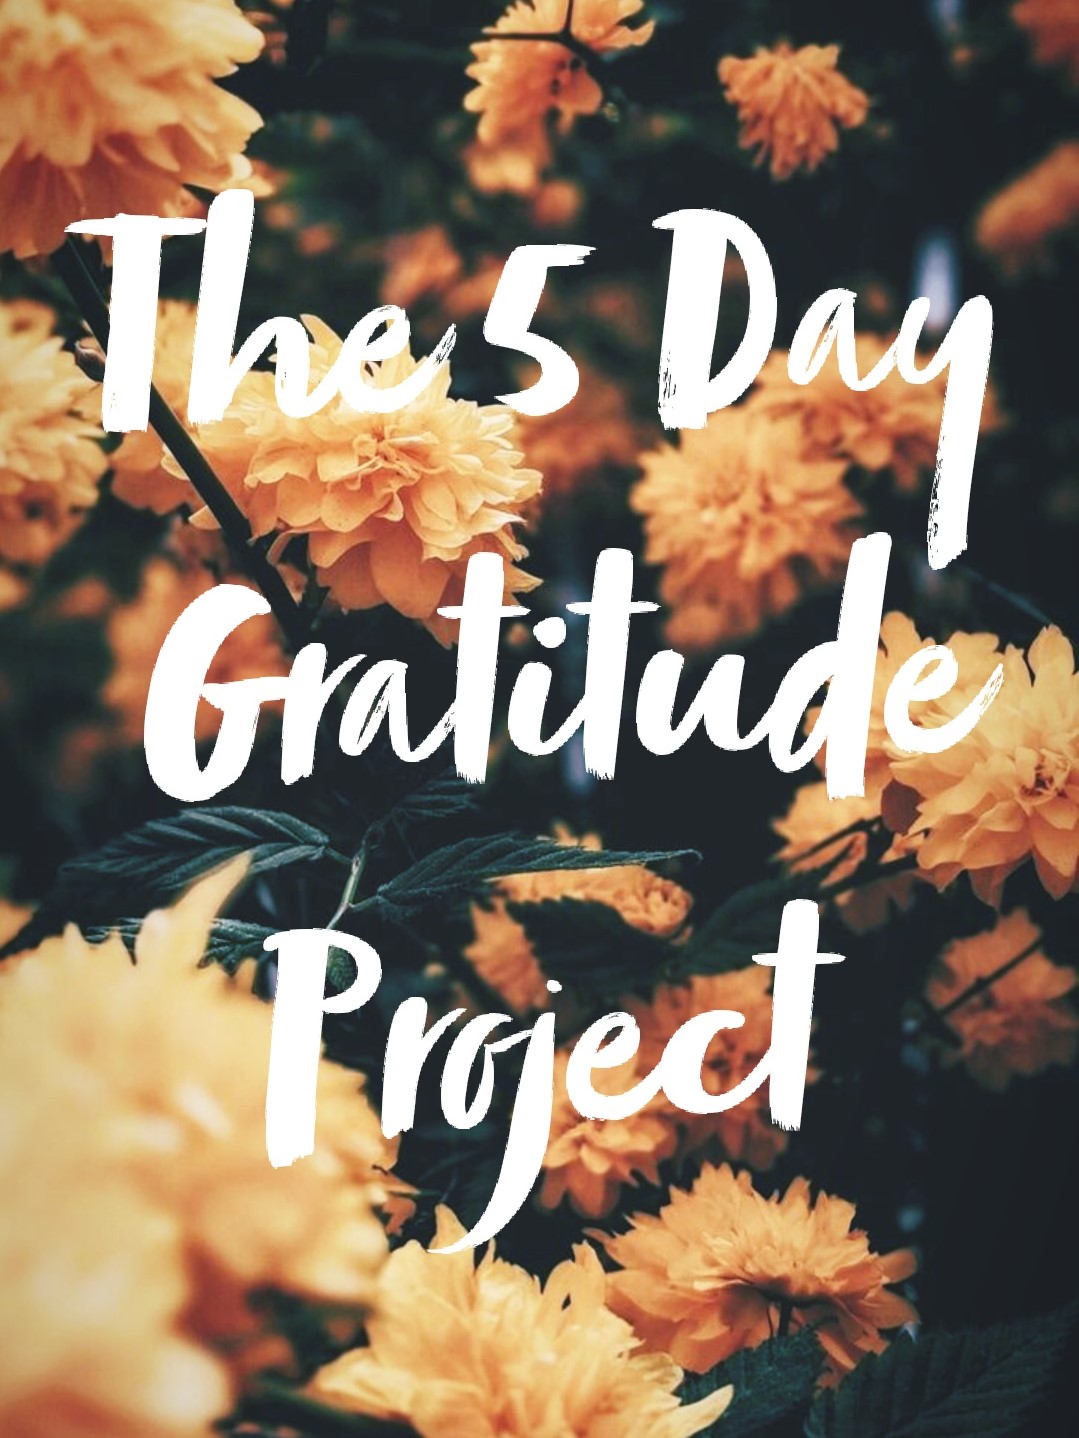 The 5 Day Gratitude Project – November 18-22, 2018